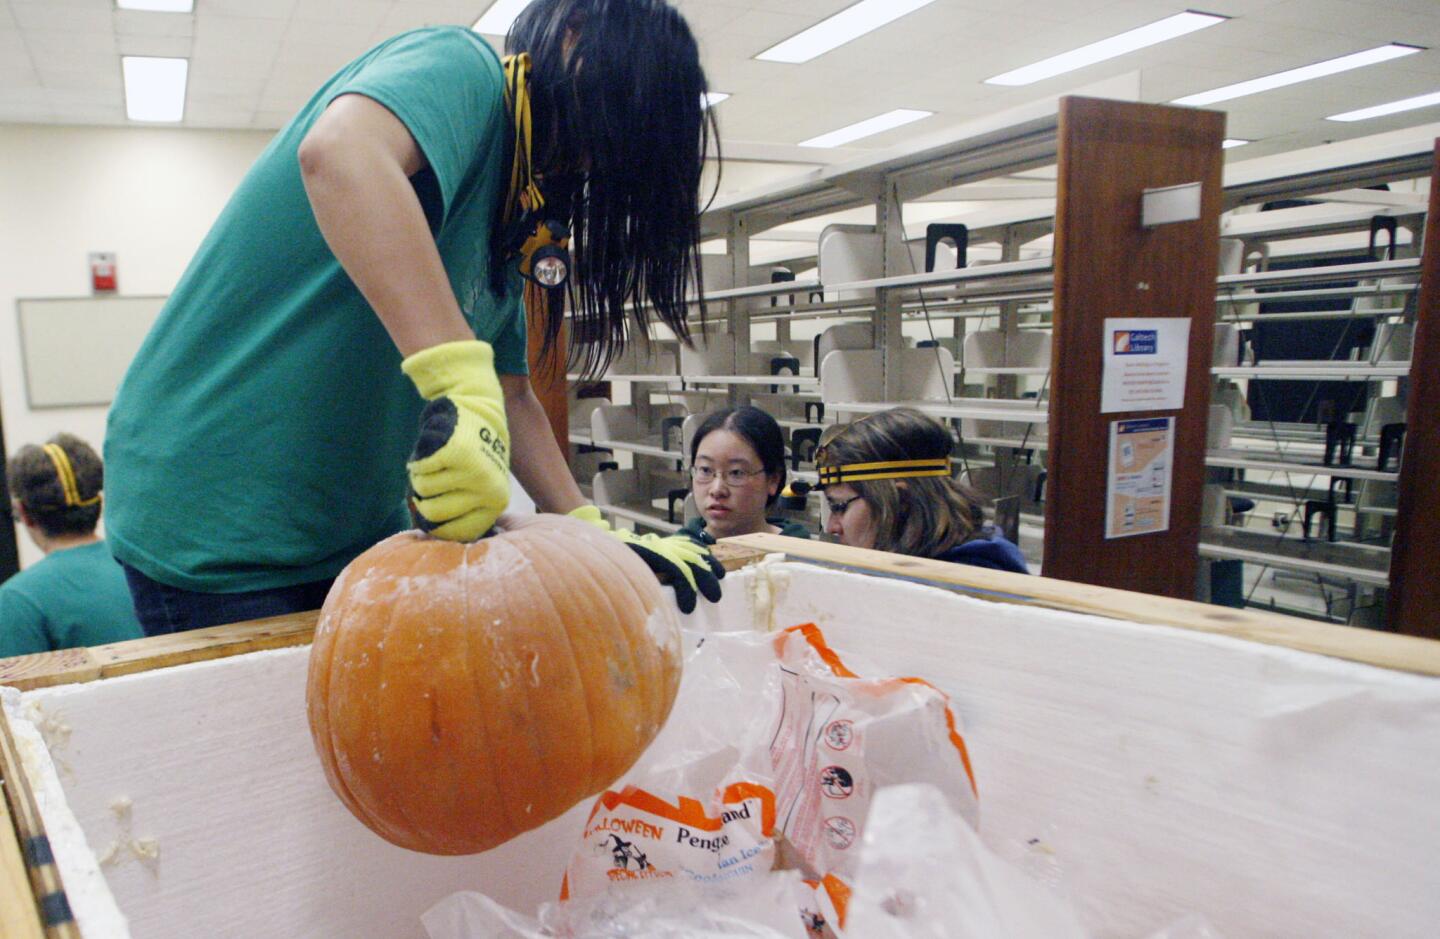 Jade Yan, from second left, Jomya Lei ad Rachel Gates unload over 400 pumpkins during Caltech's Annual Halloween Pumpkin drop, which took place at the Caltech's Millikan Library in Pasadena on Wednesday, October 31, 2012.